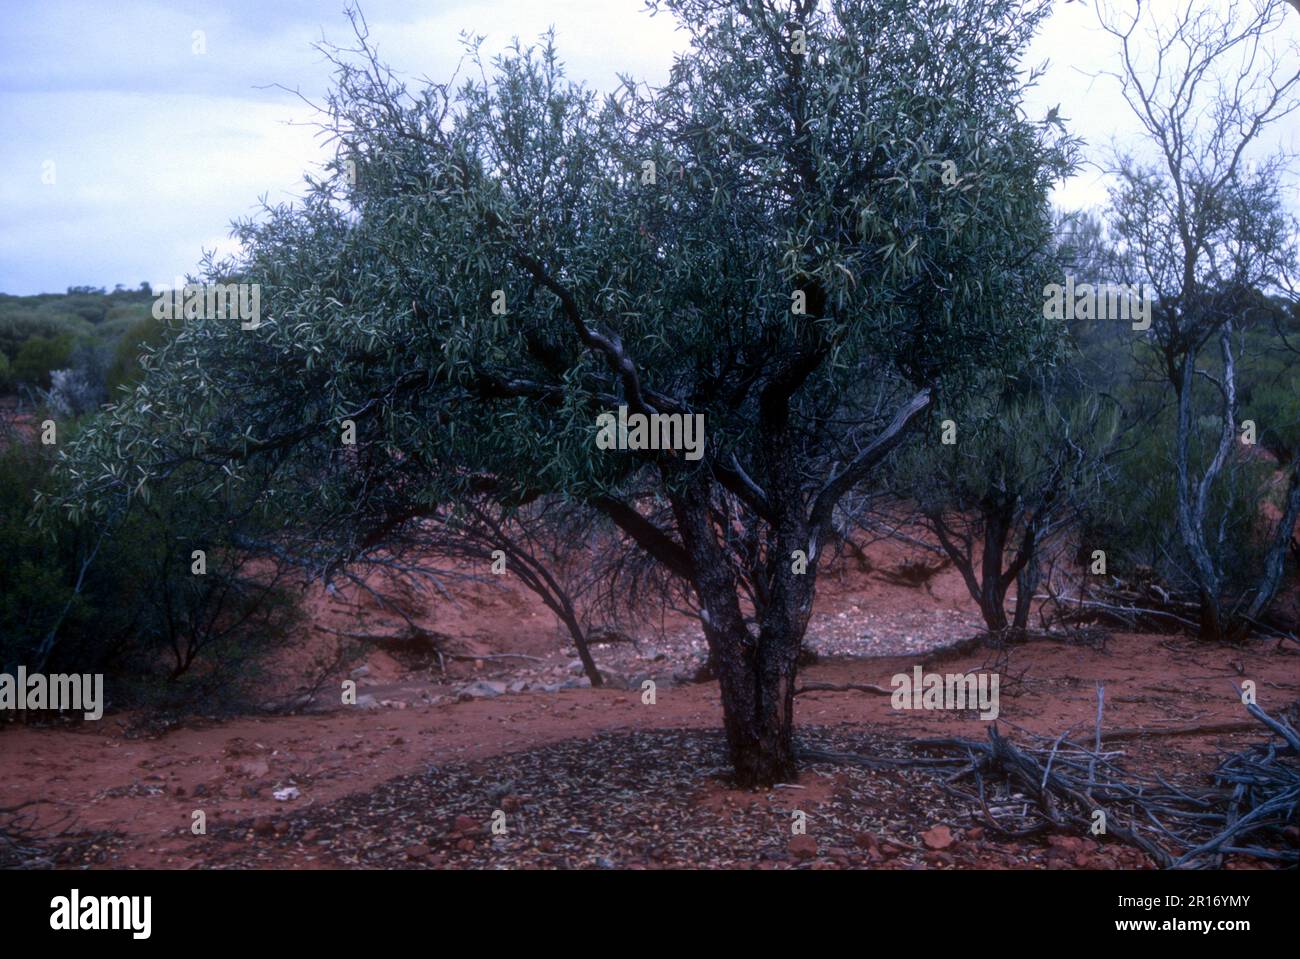 A quandong tree in central Australia produces fruit and nuts eaten by aborigines. Also called Native Peach. Stock Photo